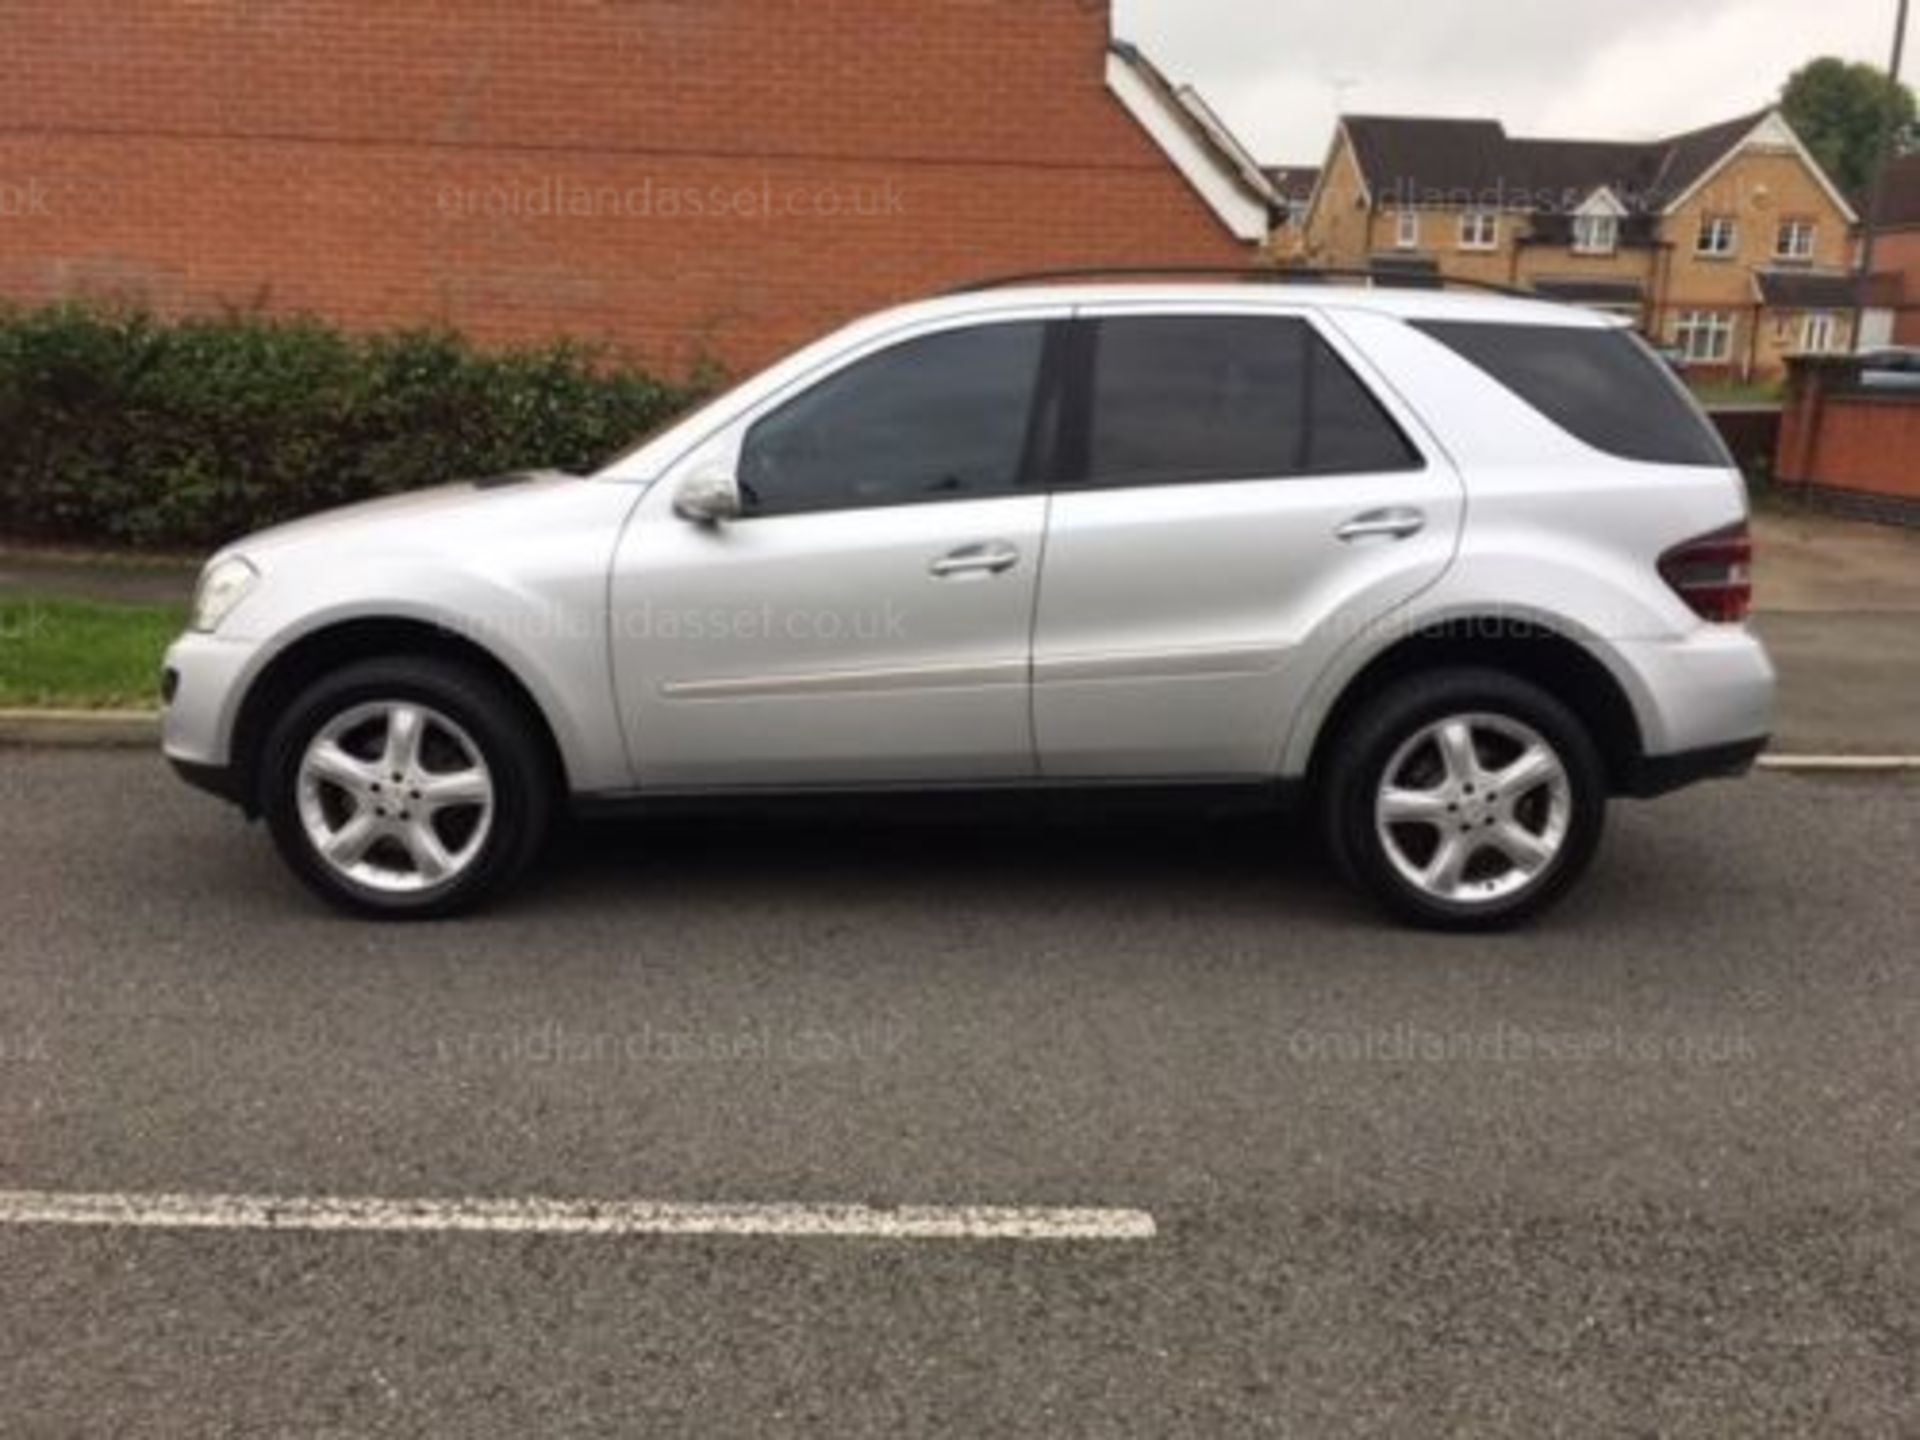 2007/57 REG MERCEDES ML 280 EDITION S CDI 4-MATIC FULL SERVICE HISTORY - Image 8 of 12